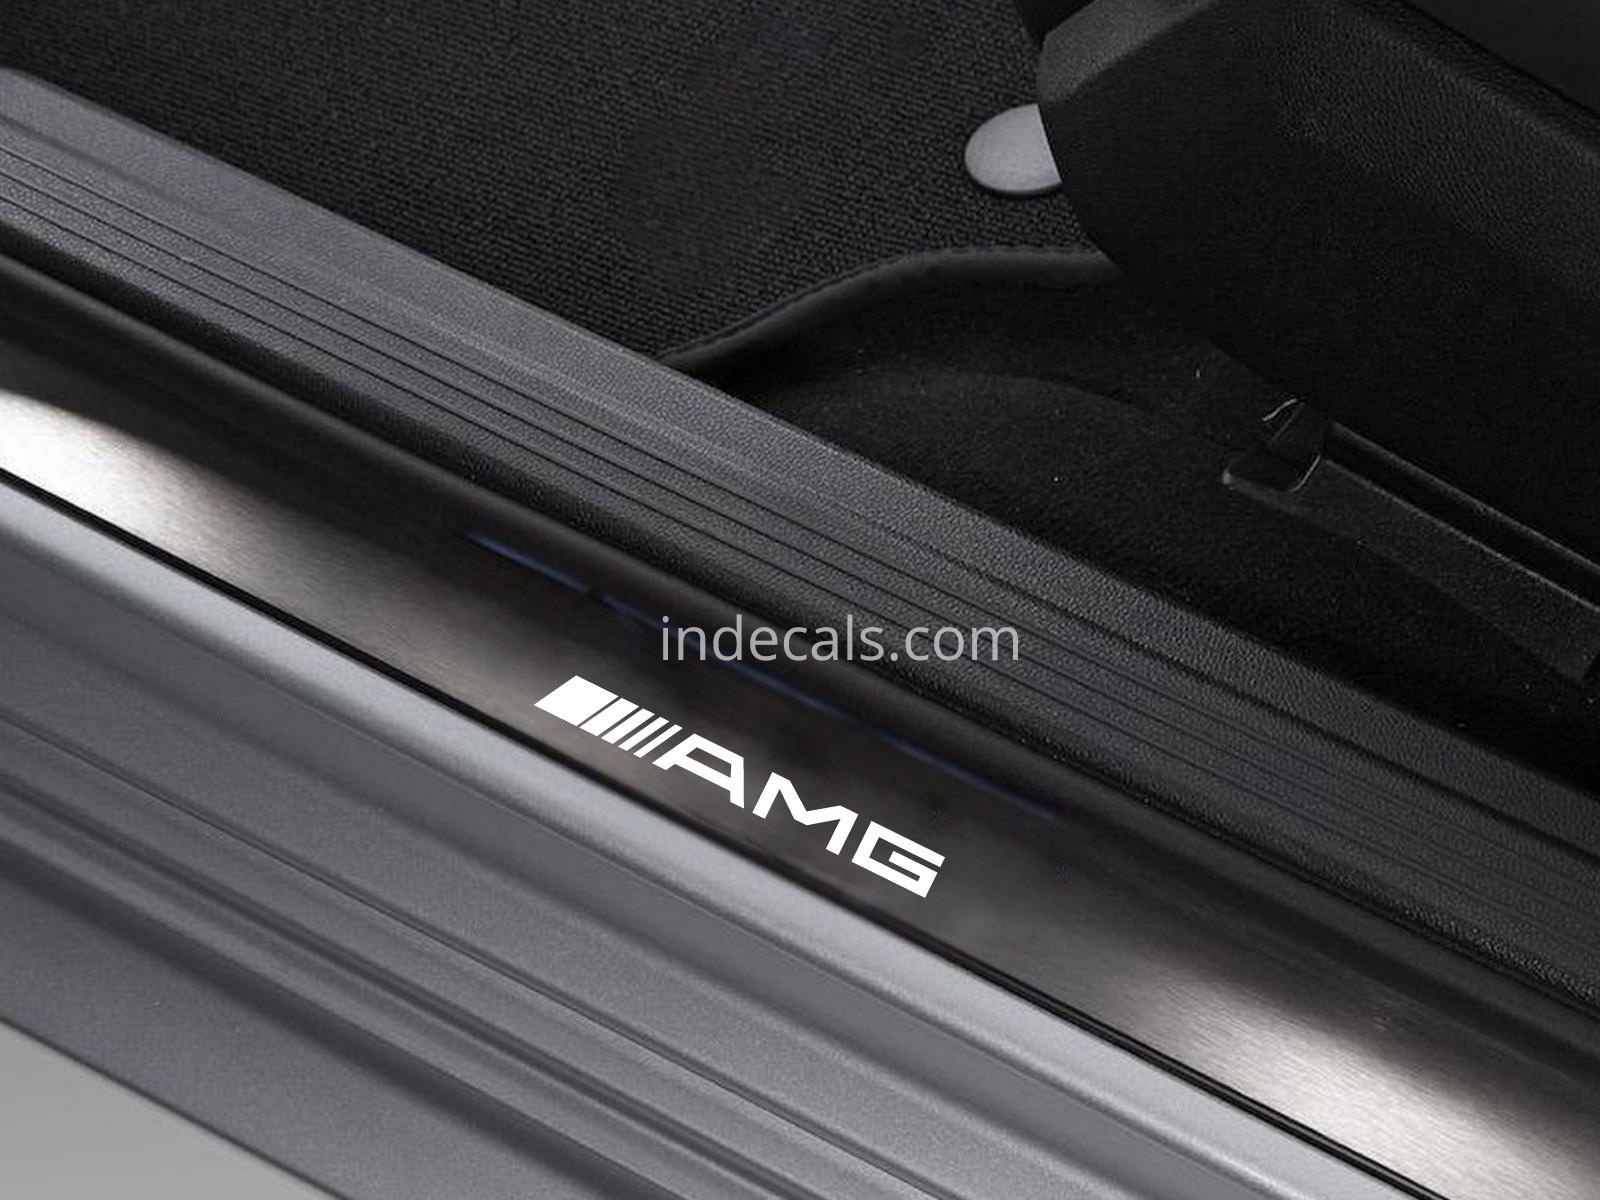 6 x AMG Stickers for Door Sills - White